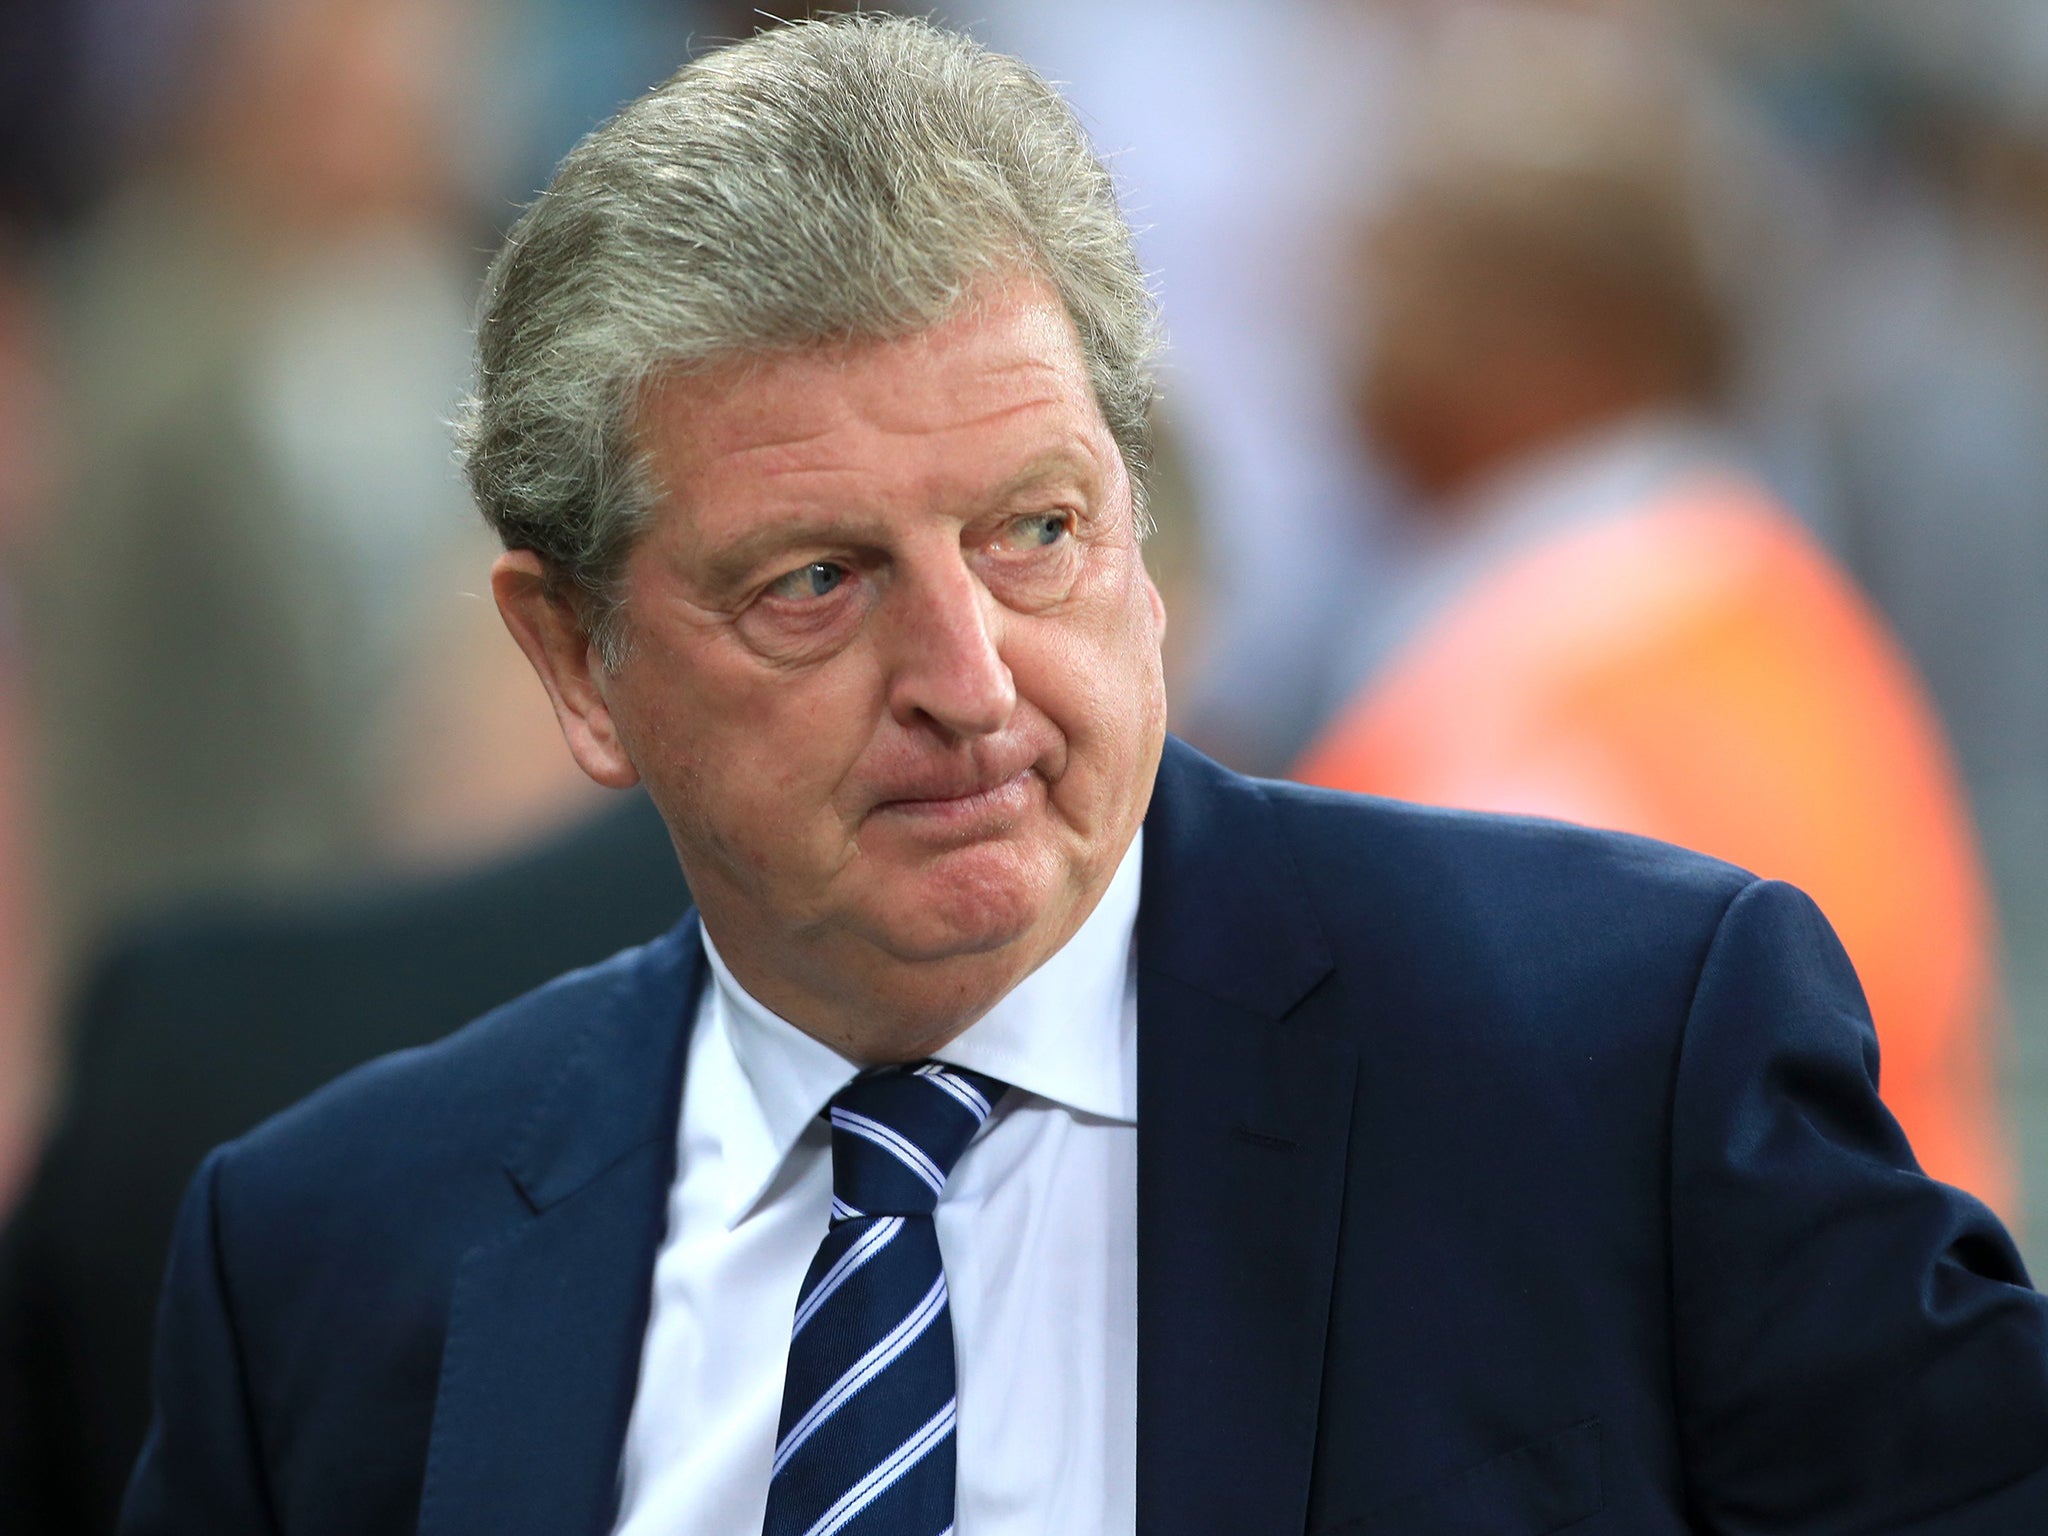 The summer in Brazil has ensured that Roy Hodgson too has his share of the England team’s pain